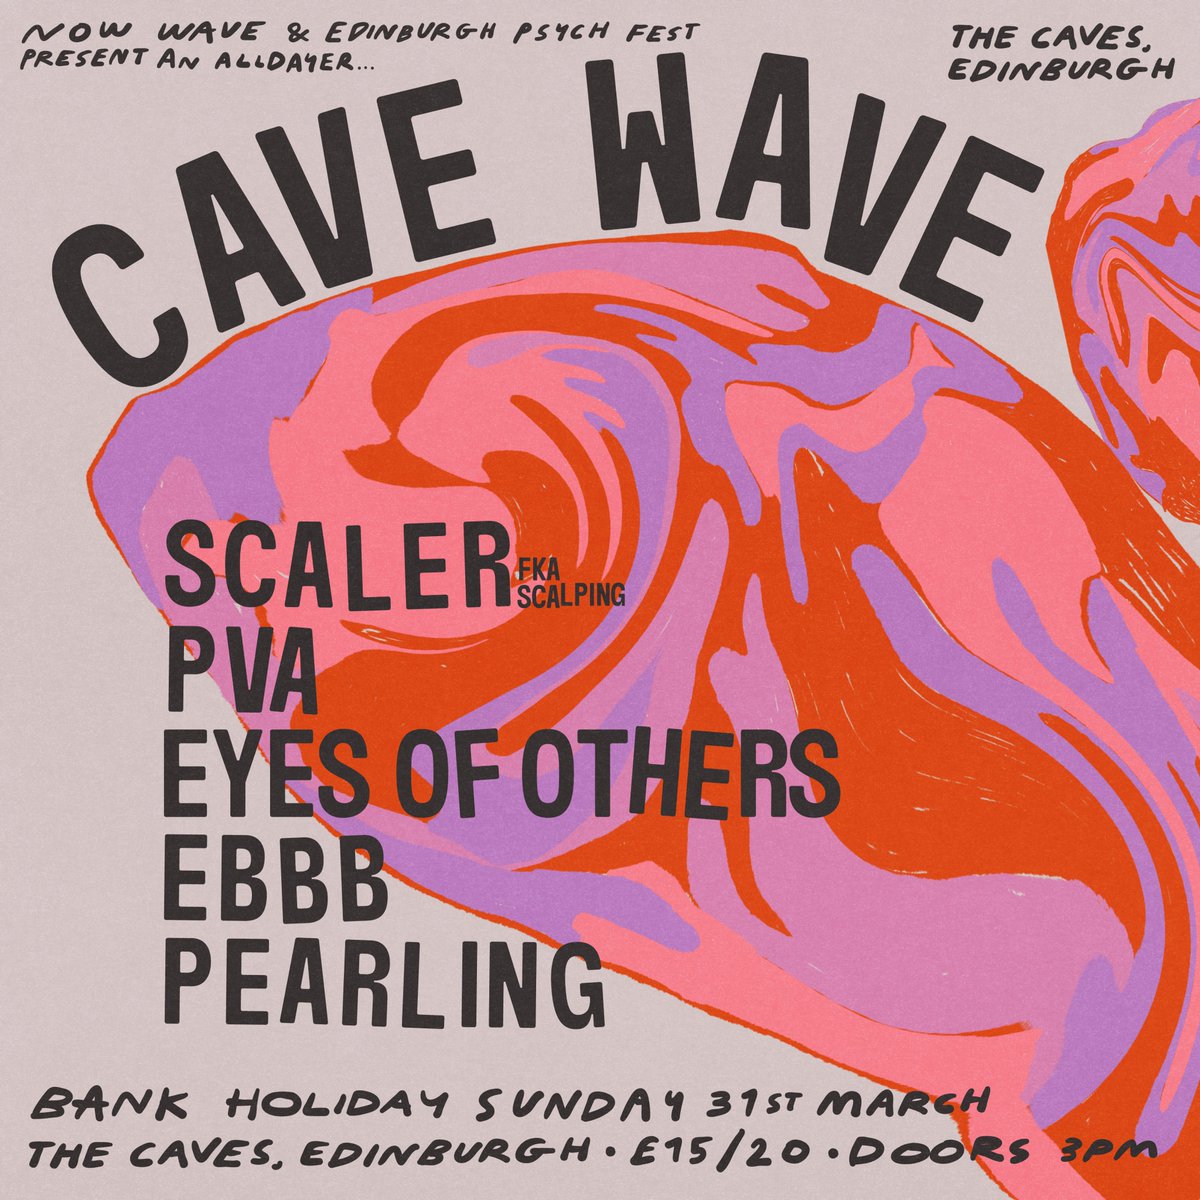 We're hosting an EPF24 warm-up party on bank holiday Sunday 31st March with SCALER, PVA, Eyes of Others, EBBB and Pearling. £15 early bird tickets on sale 10 am Friday. tinyurl.com/CAVEWAVE24